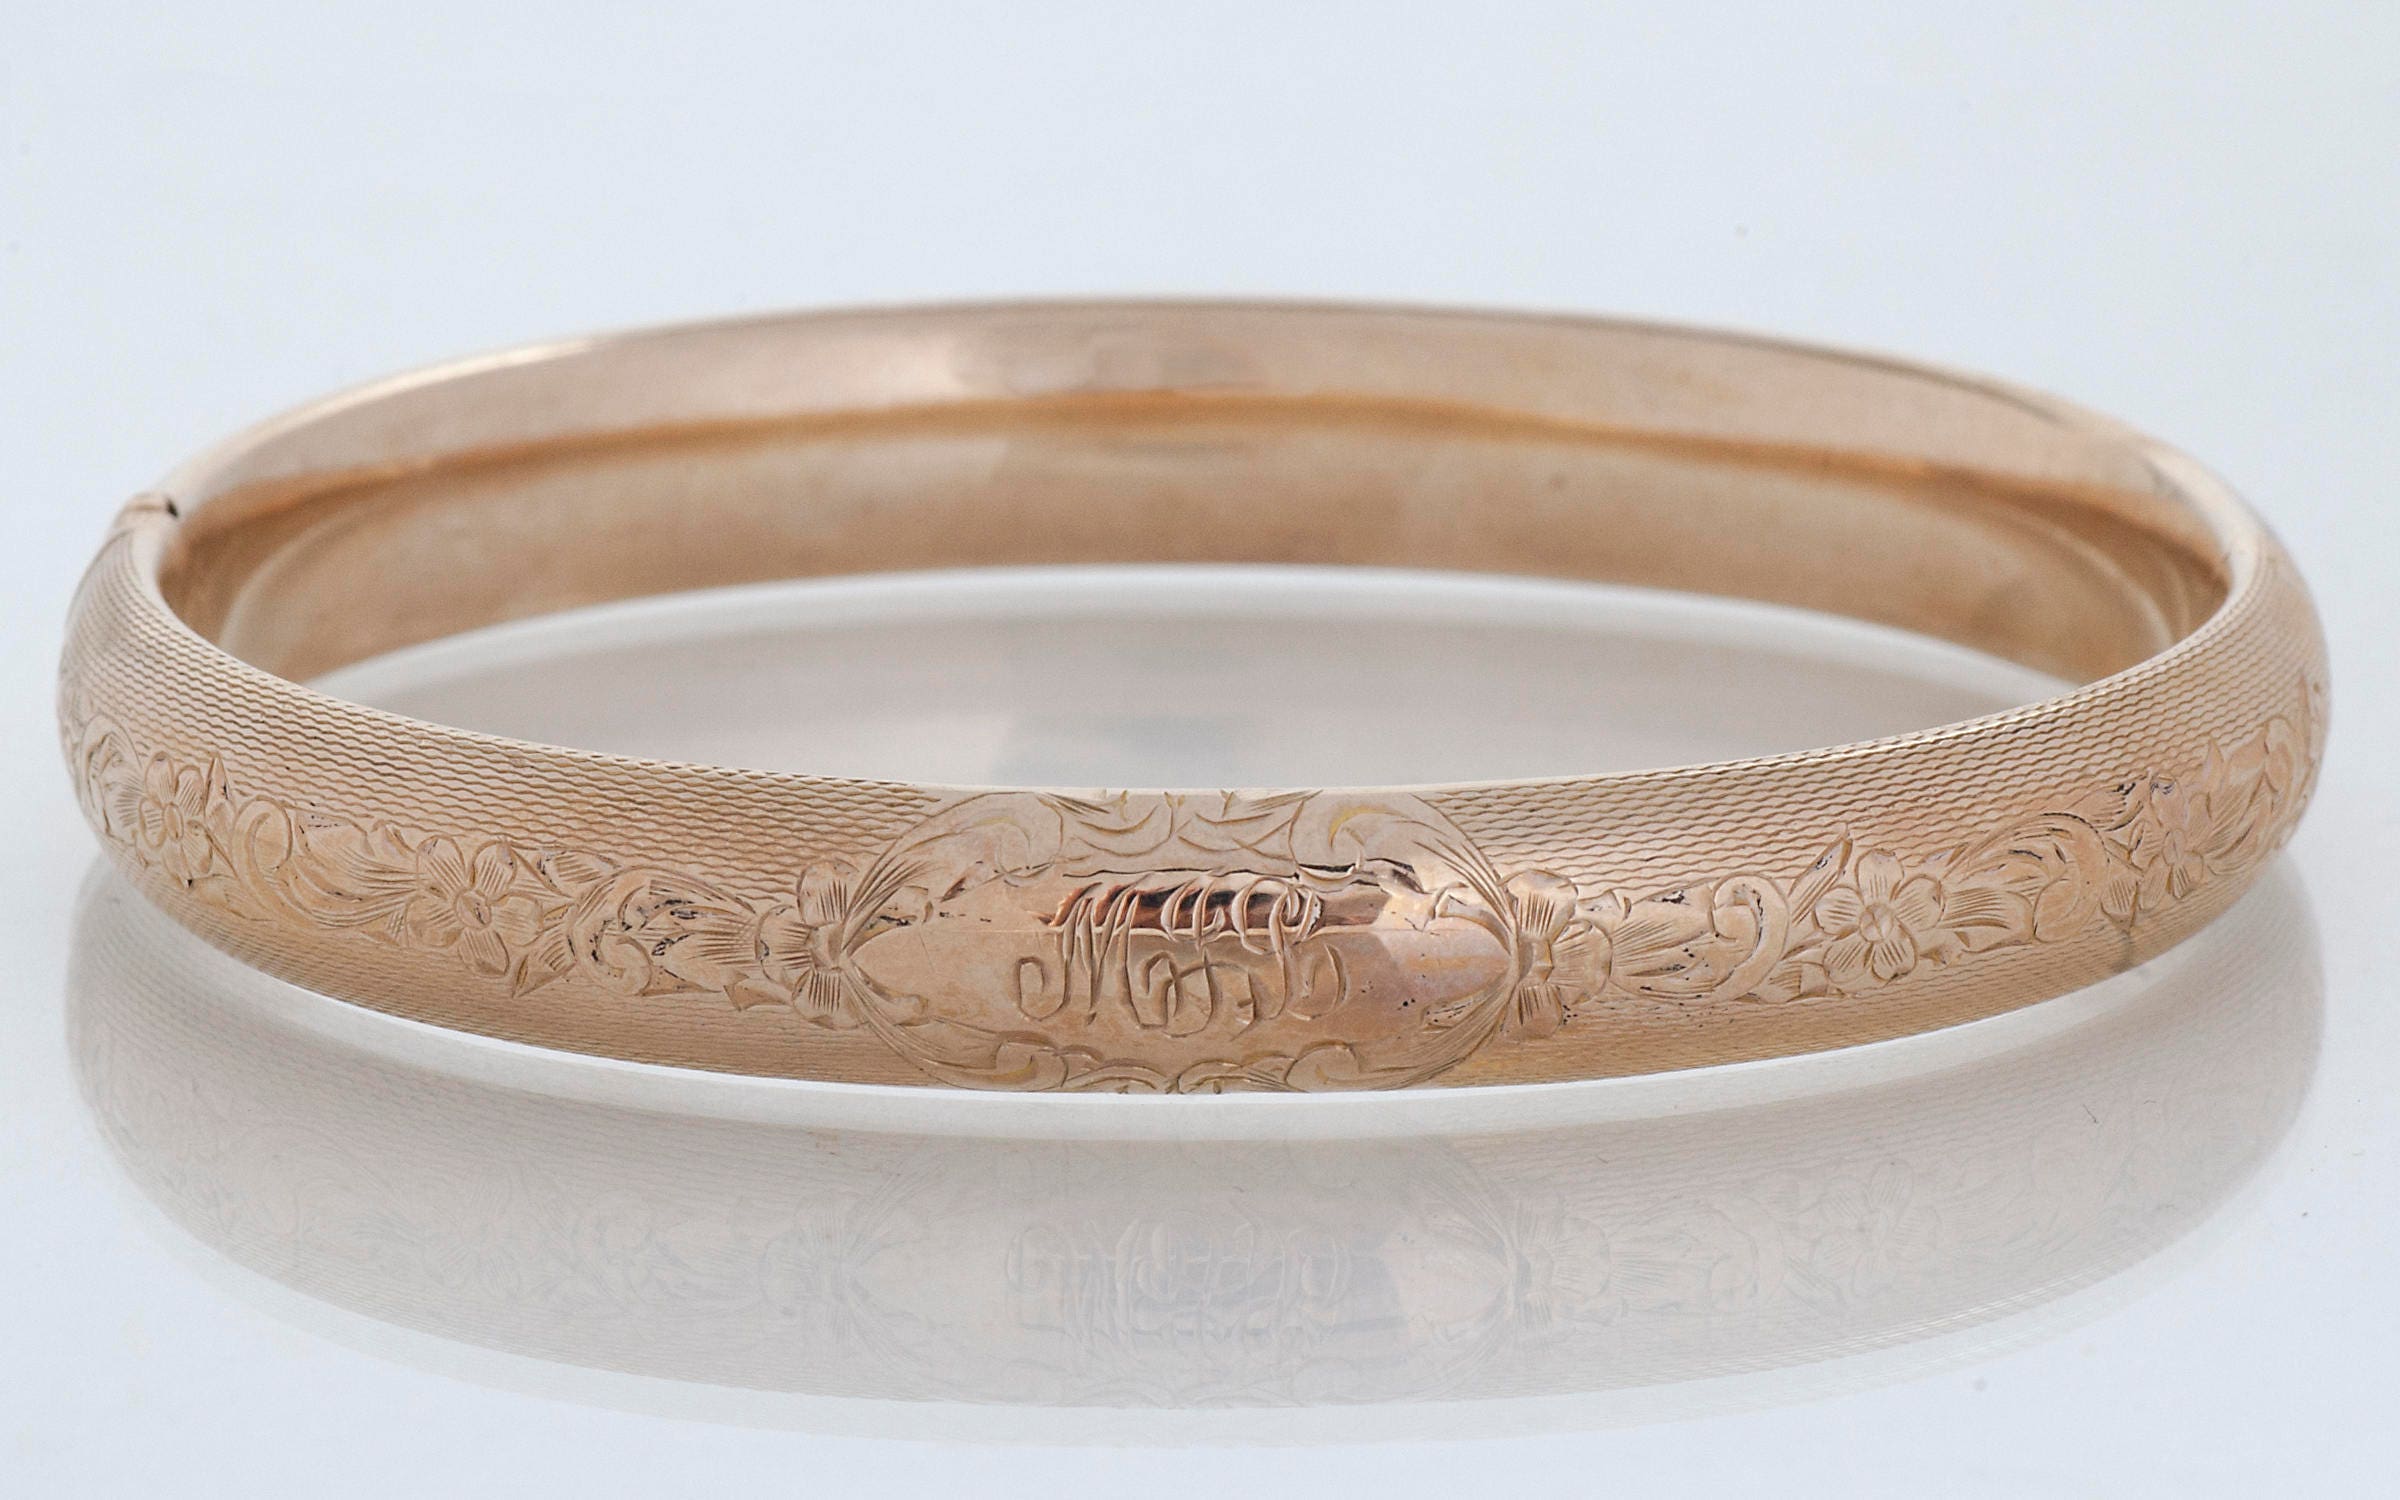 Mantra Band Personalized Rose Gold Plated| Alibaba.com